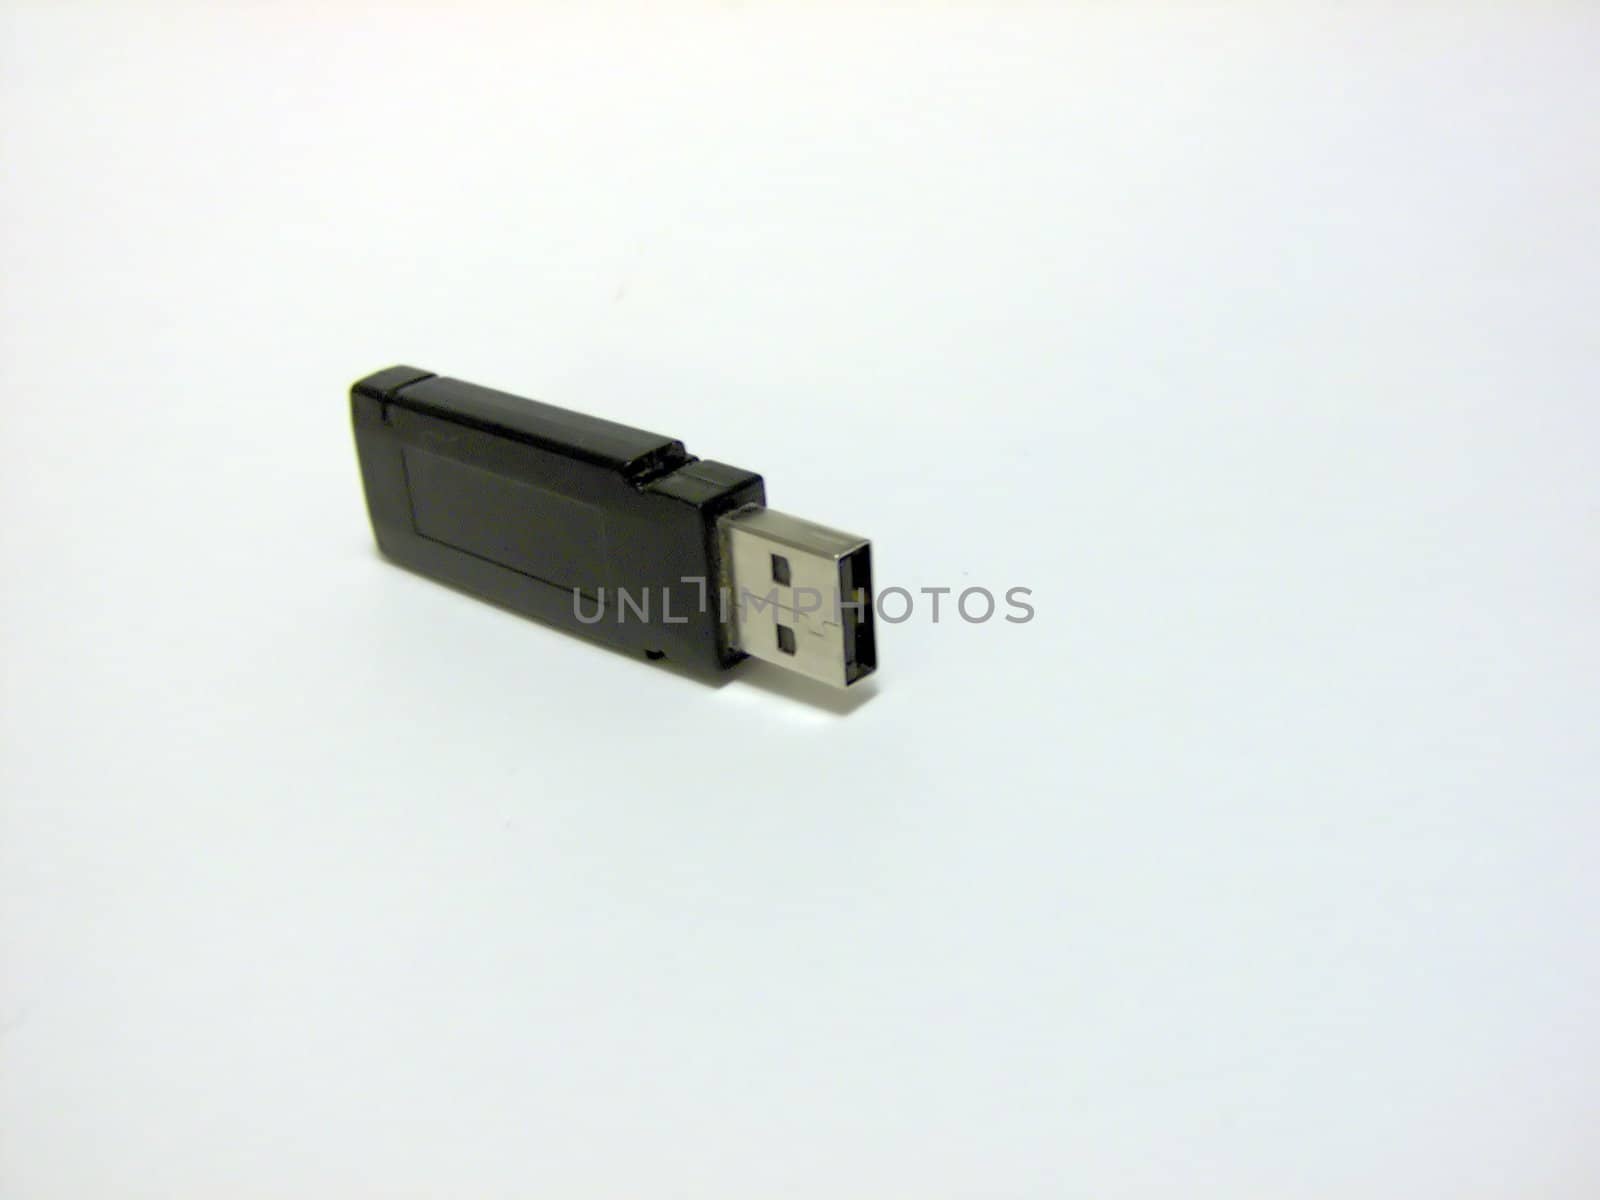 USB Flash/Thumb Drive by graficallyminded